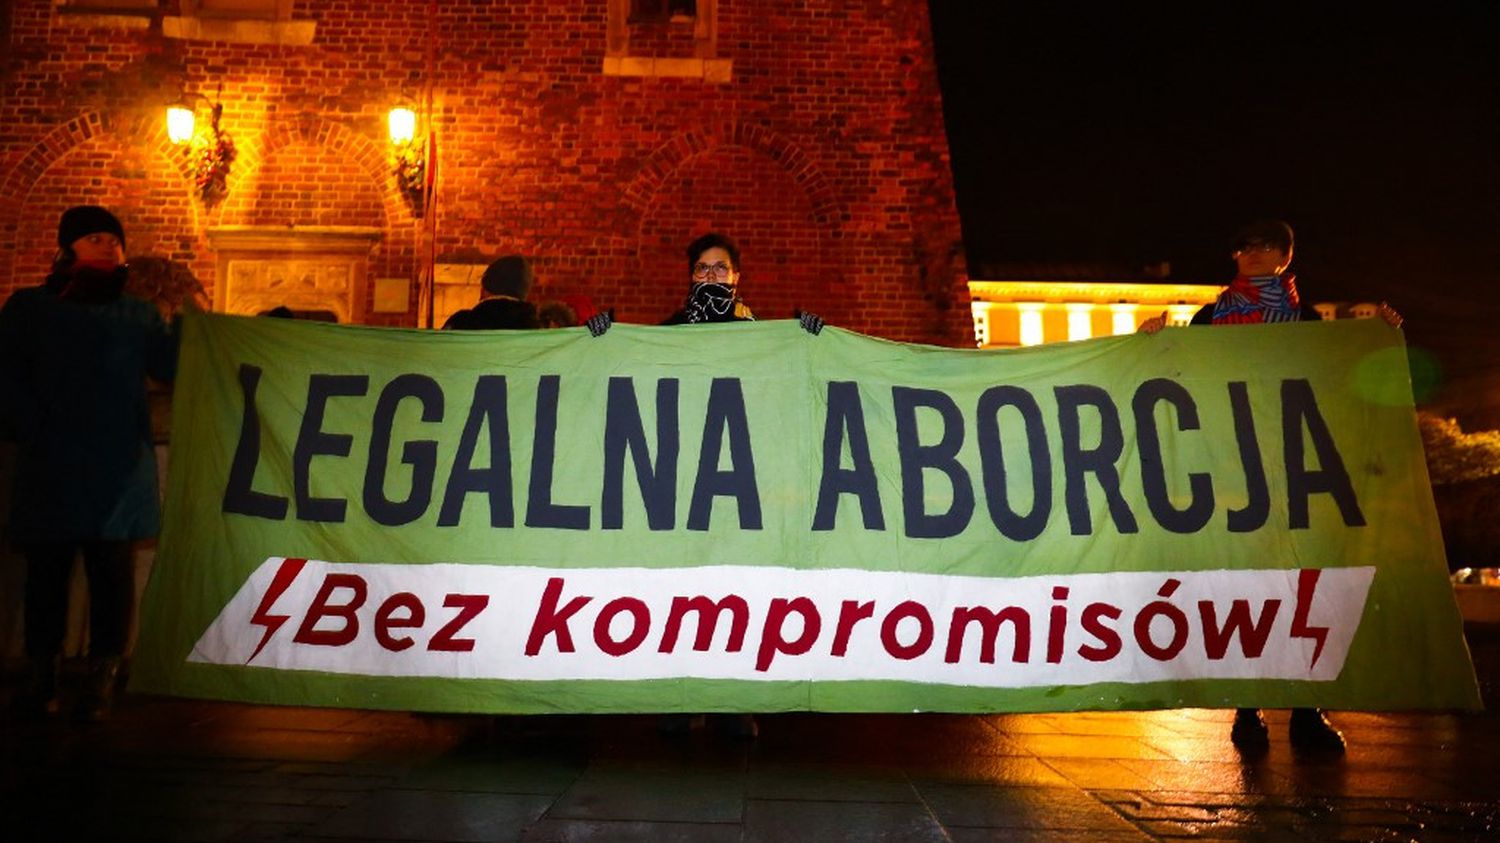 Poland: parliament rejects proposal to liberalize abortion law
